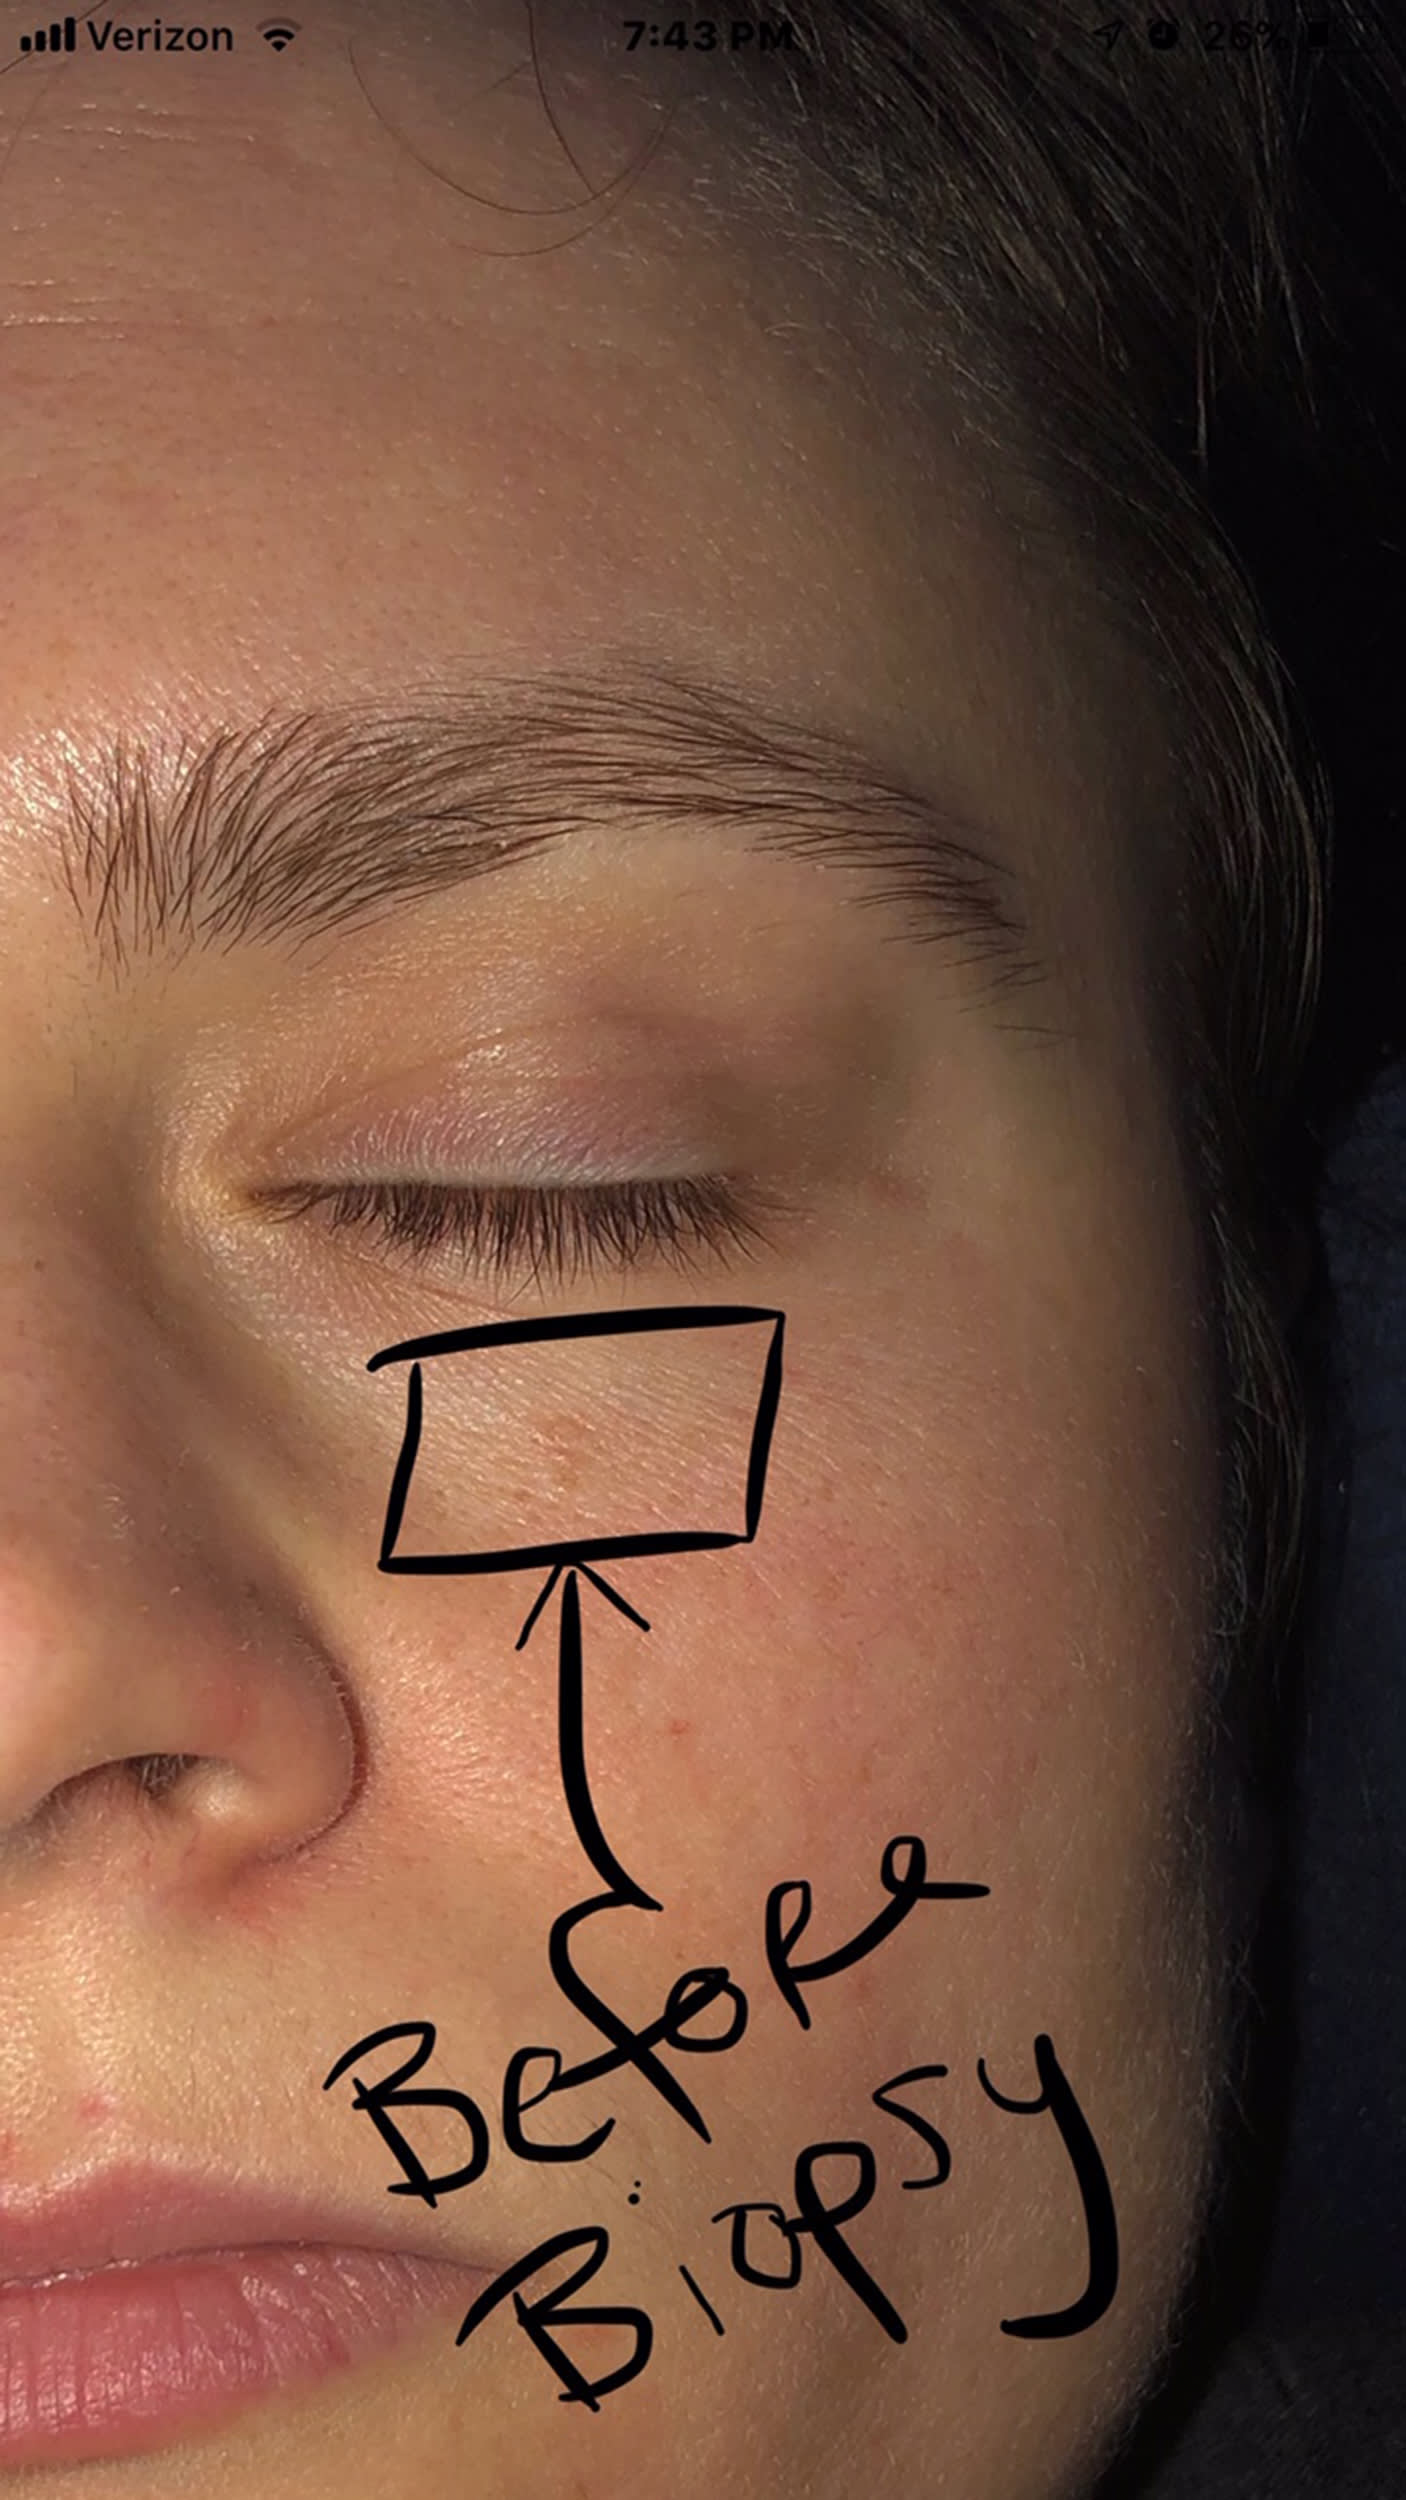 cancer: Woman discovers basal cell carcinoma near eye